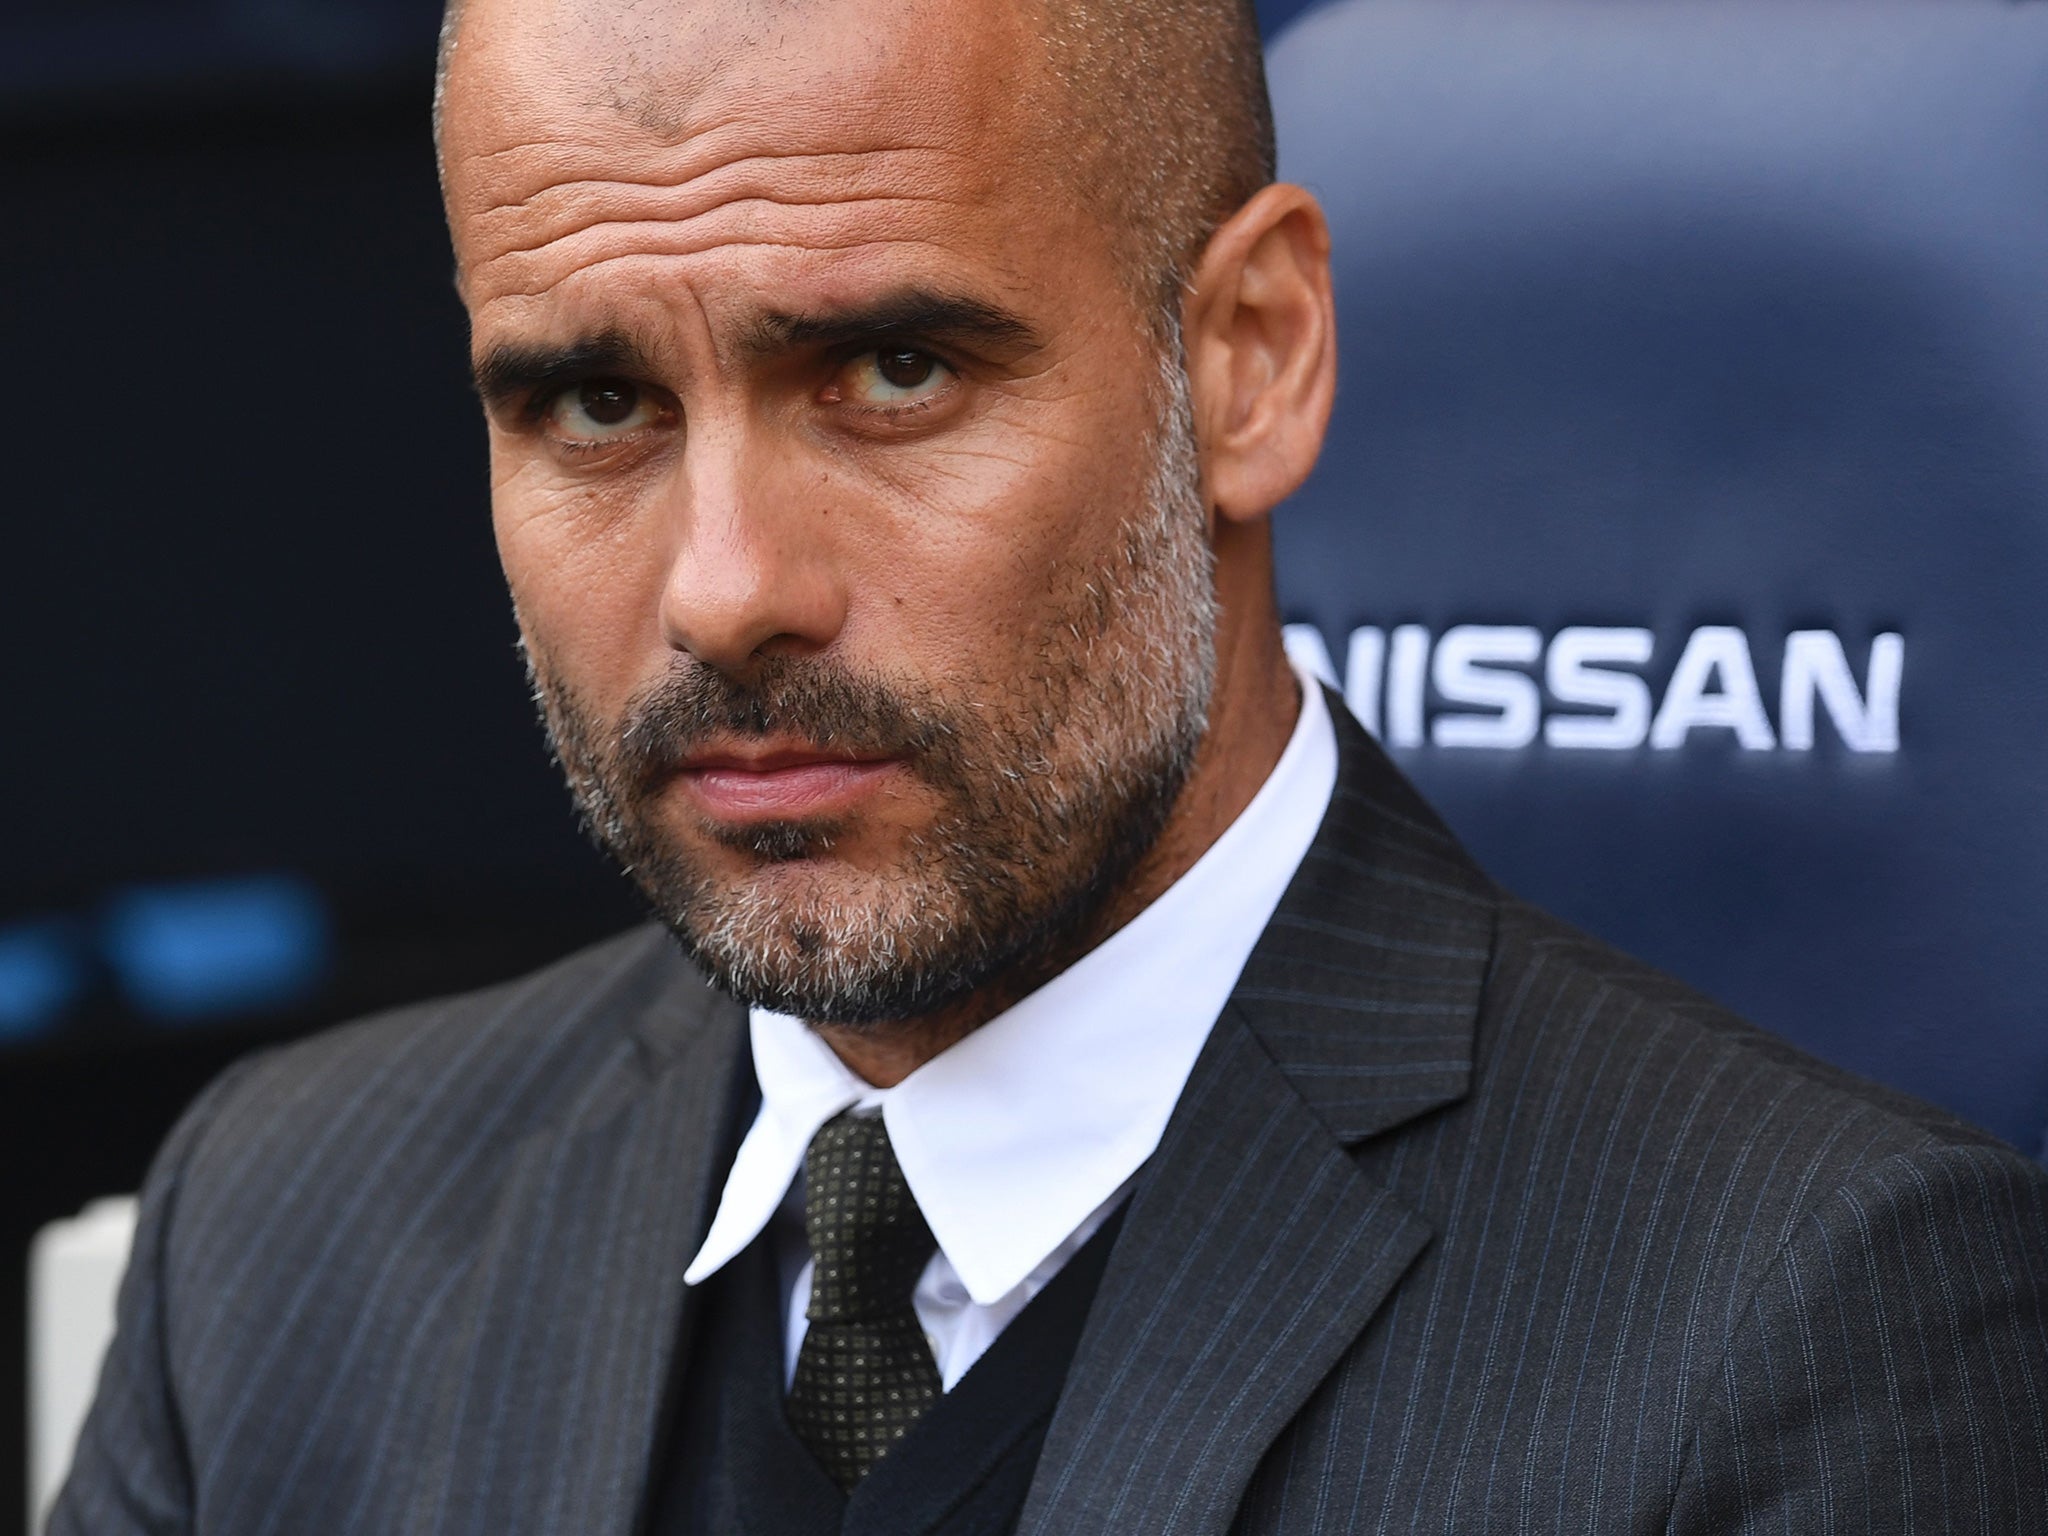 The man to stop - Guardiola remains unbeaten with City this season